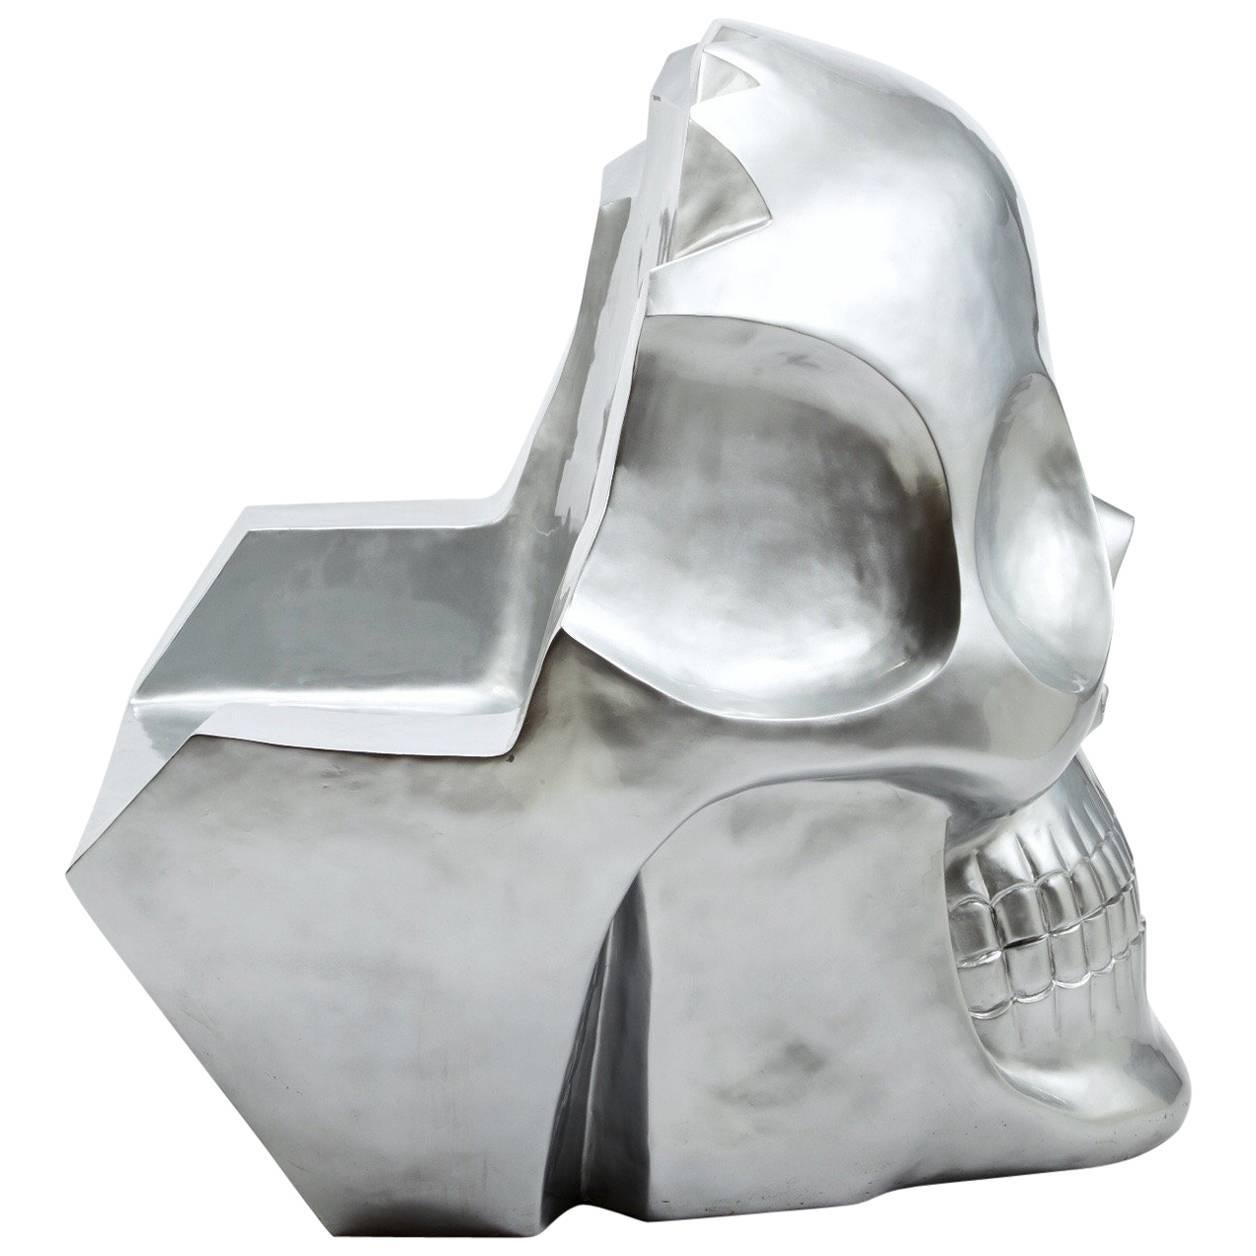 Contemporary Armchair Skull Transvital Mother by Antonio Cagianelli, Italy